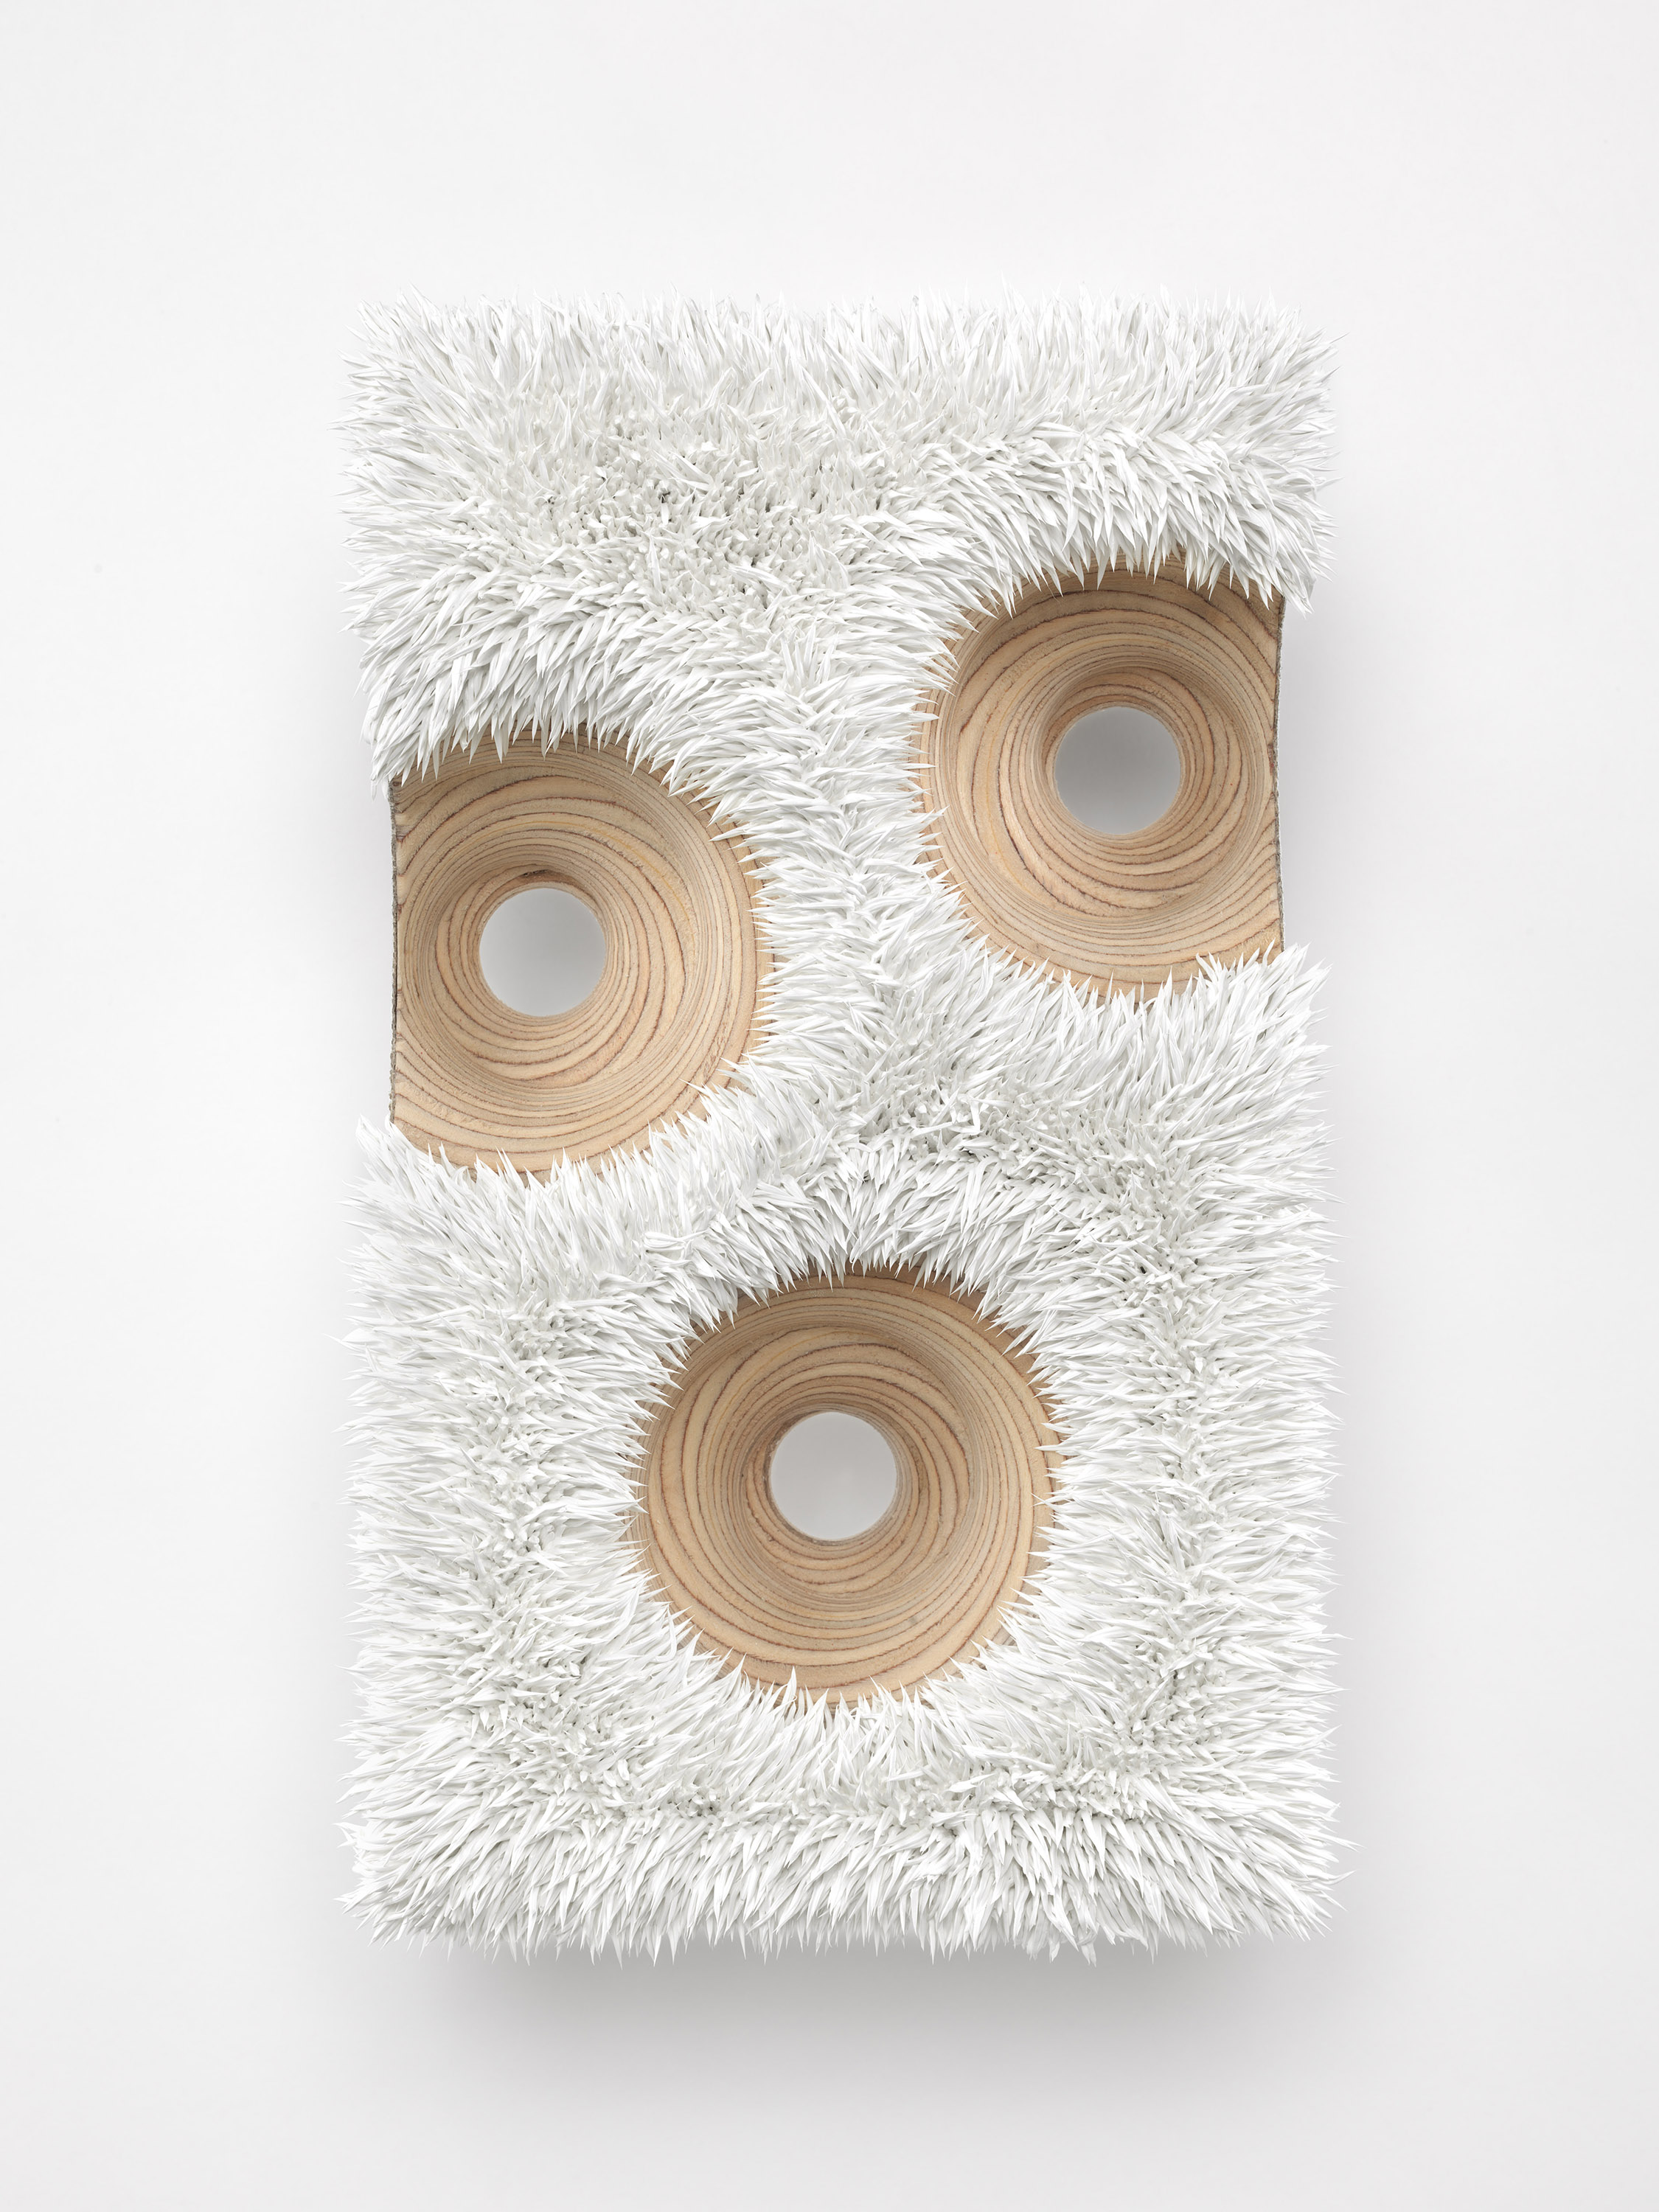 Donald Moffett, Lot 092517 (faccia, titanium white), 2017, oil on linen, wood panel, steel, 12.50h x 7.50w x 6.50d in. Courtesy of the artist and Marianne Boesky Gallery, New York and Aspen. © Donald Moffett. Photo Credit: Christopher Burke Studios.